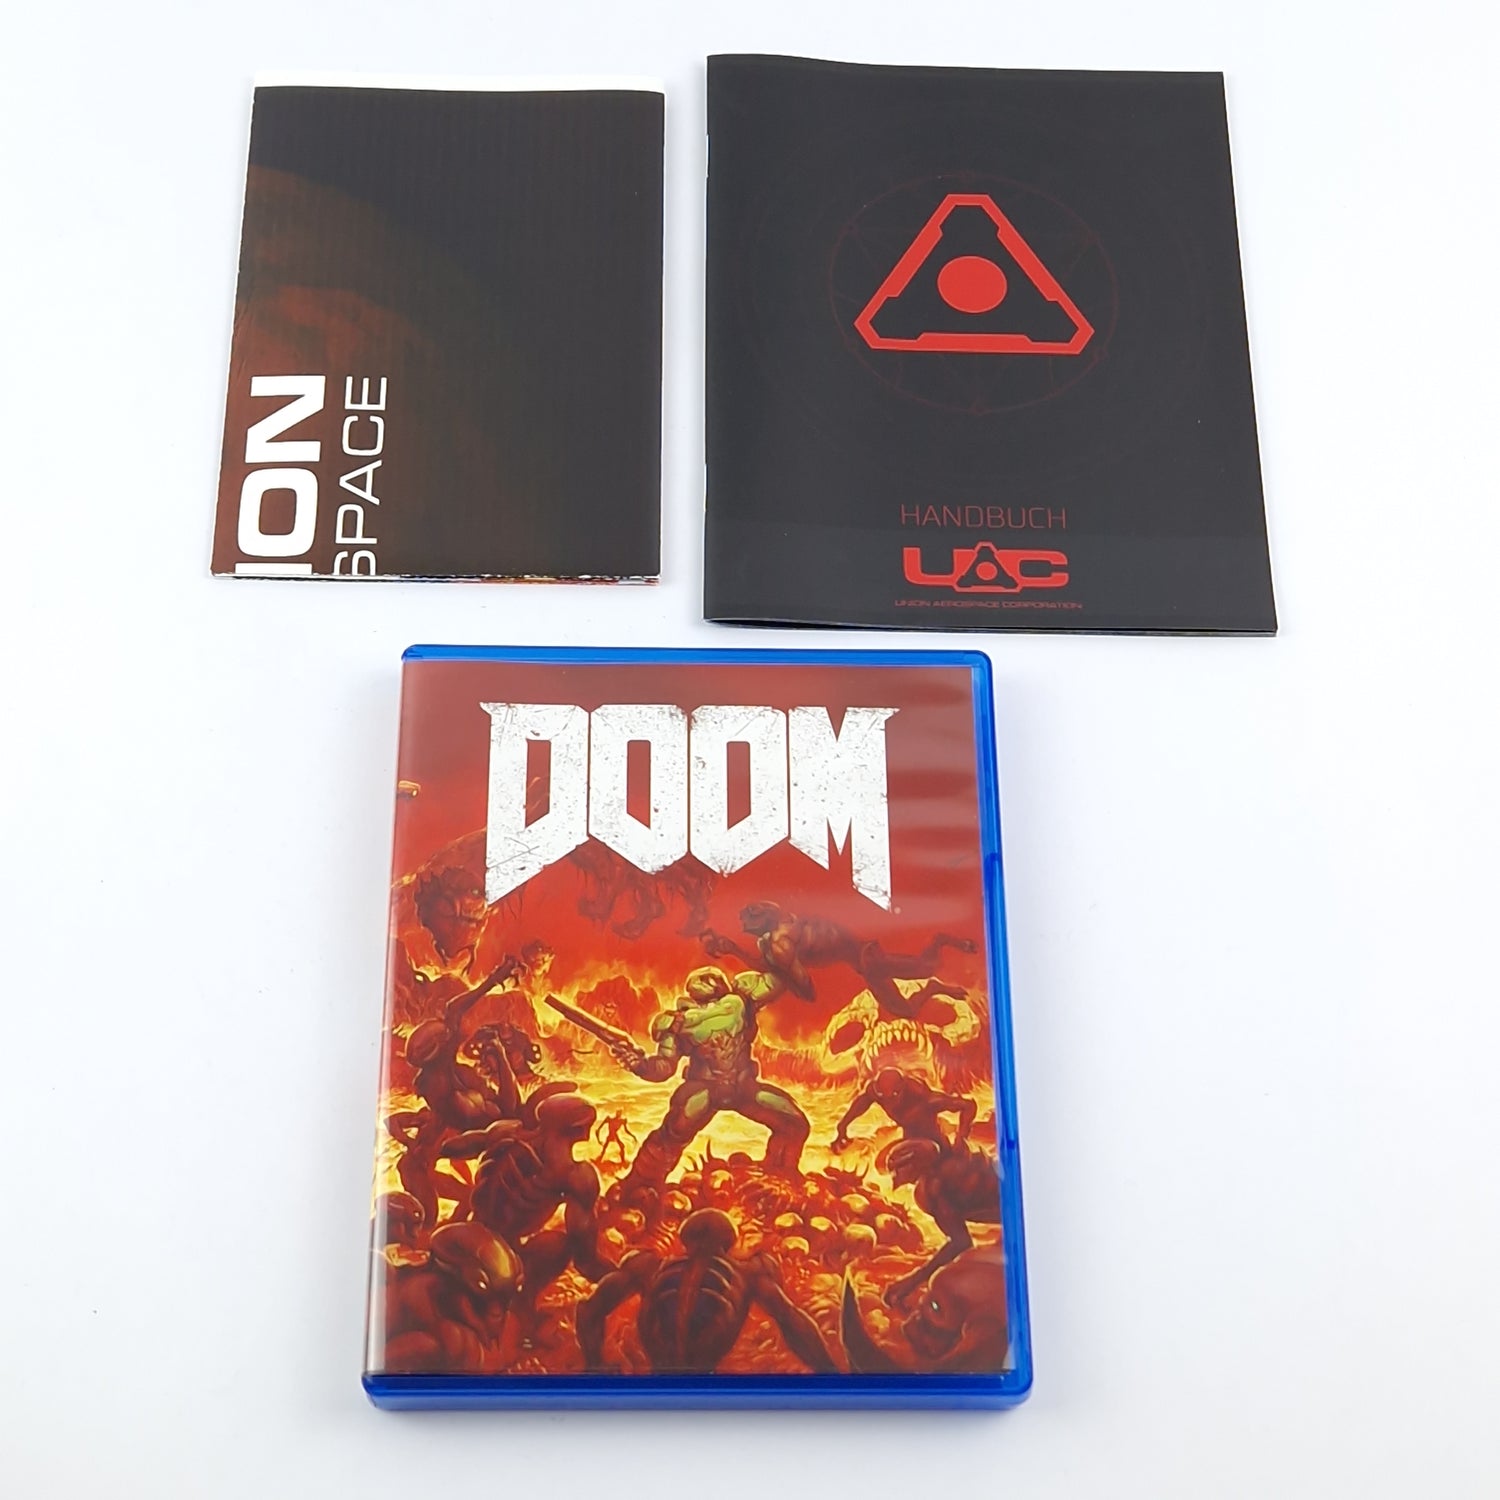 Playstation 4 game: DOOM UAC PACK - OVP instructions CD - SONY PS4 USK18